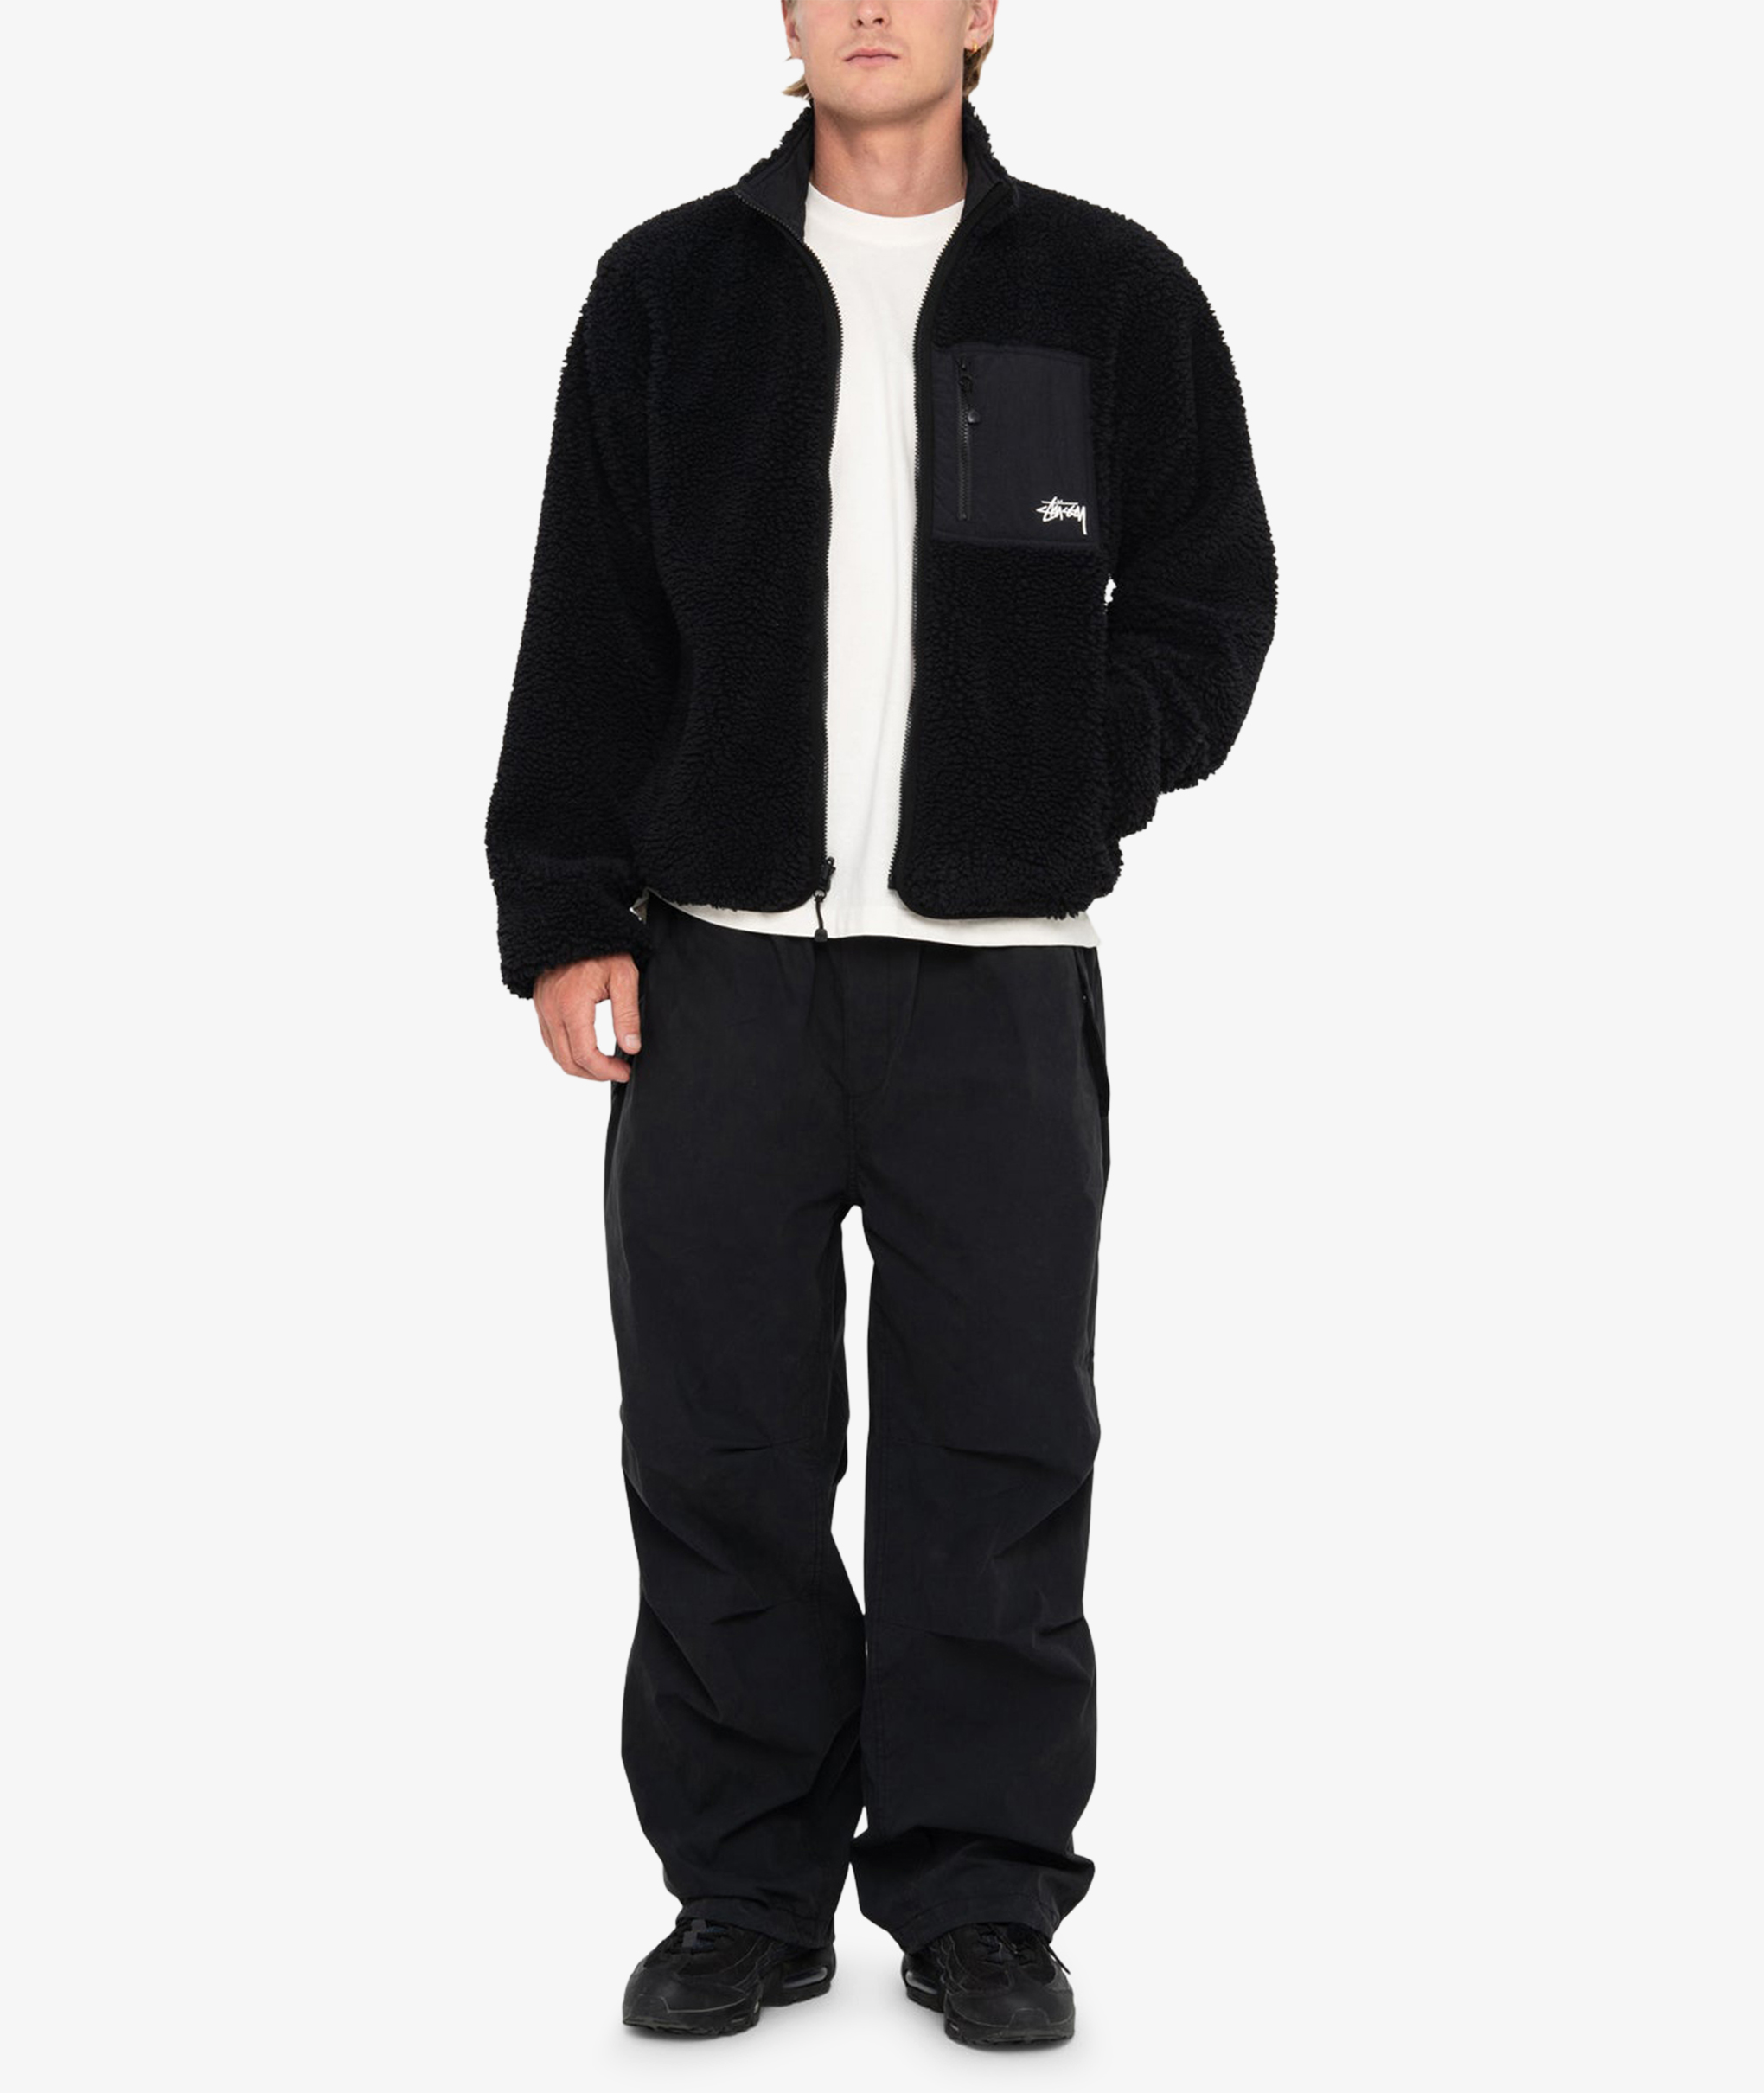 Norse Store | Shipping Worldwide - Stüssy Nyco Over Trousers - Black